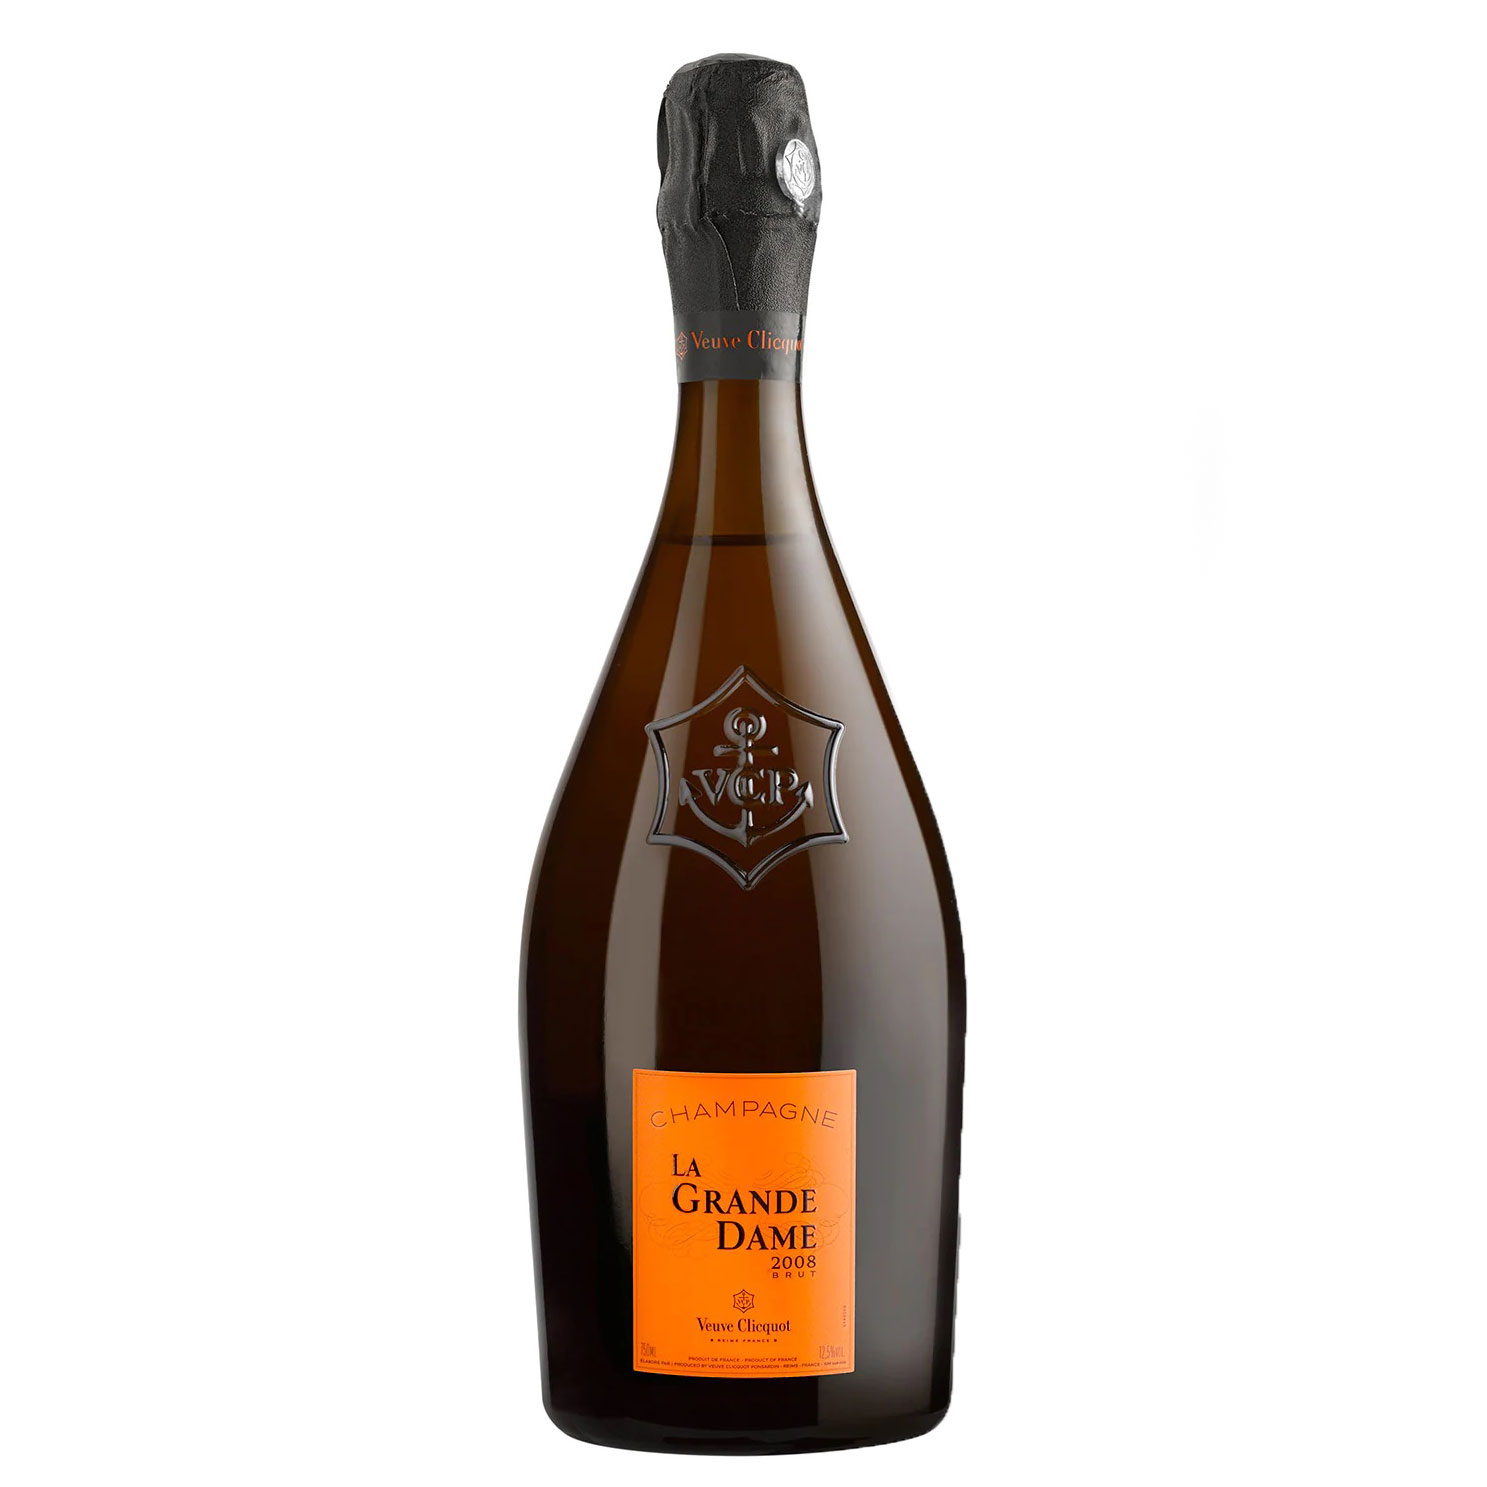 Buy And Send La Grande Dame 2008 by Veuve Clicquot Gift Online